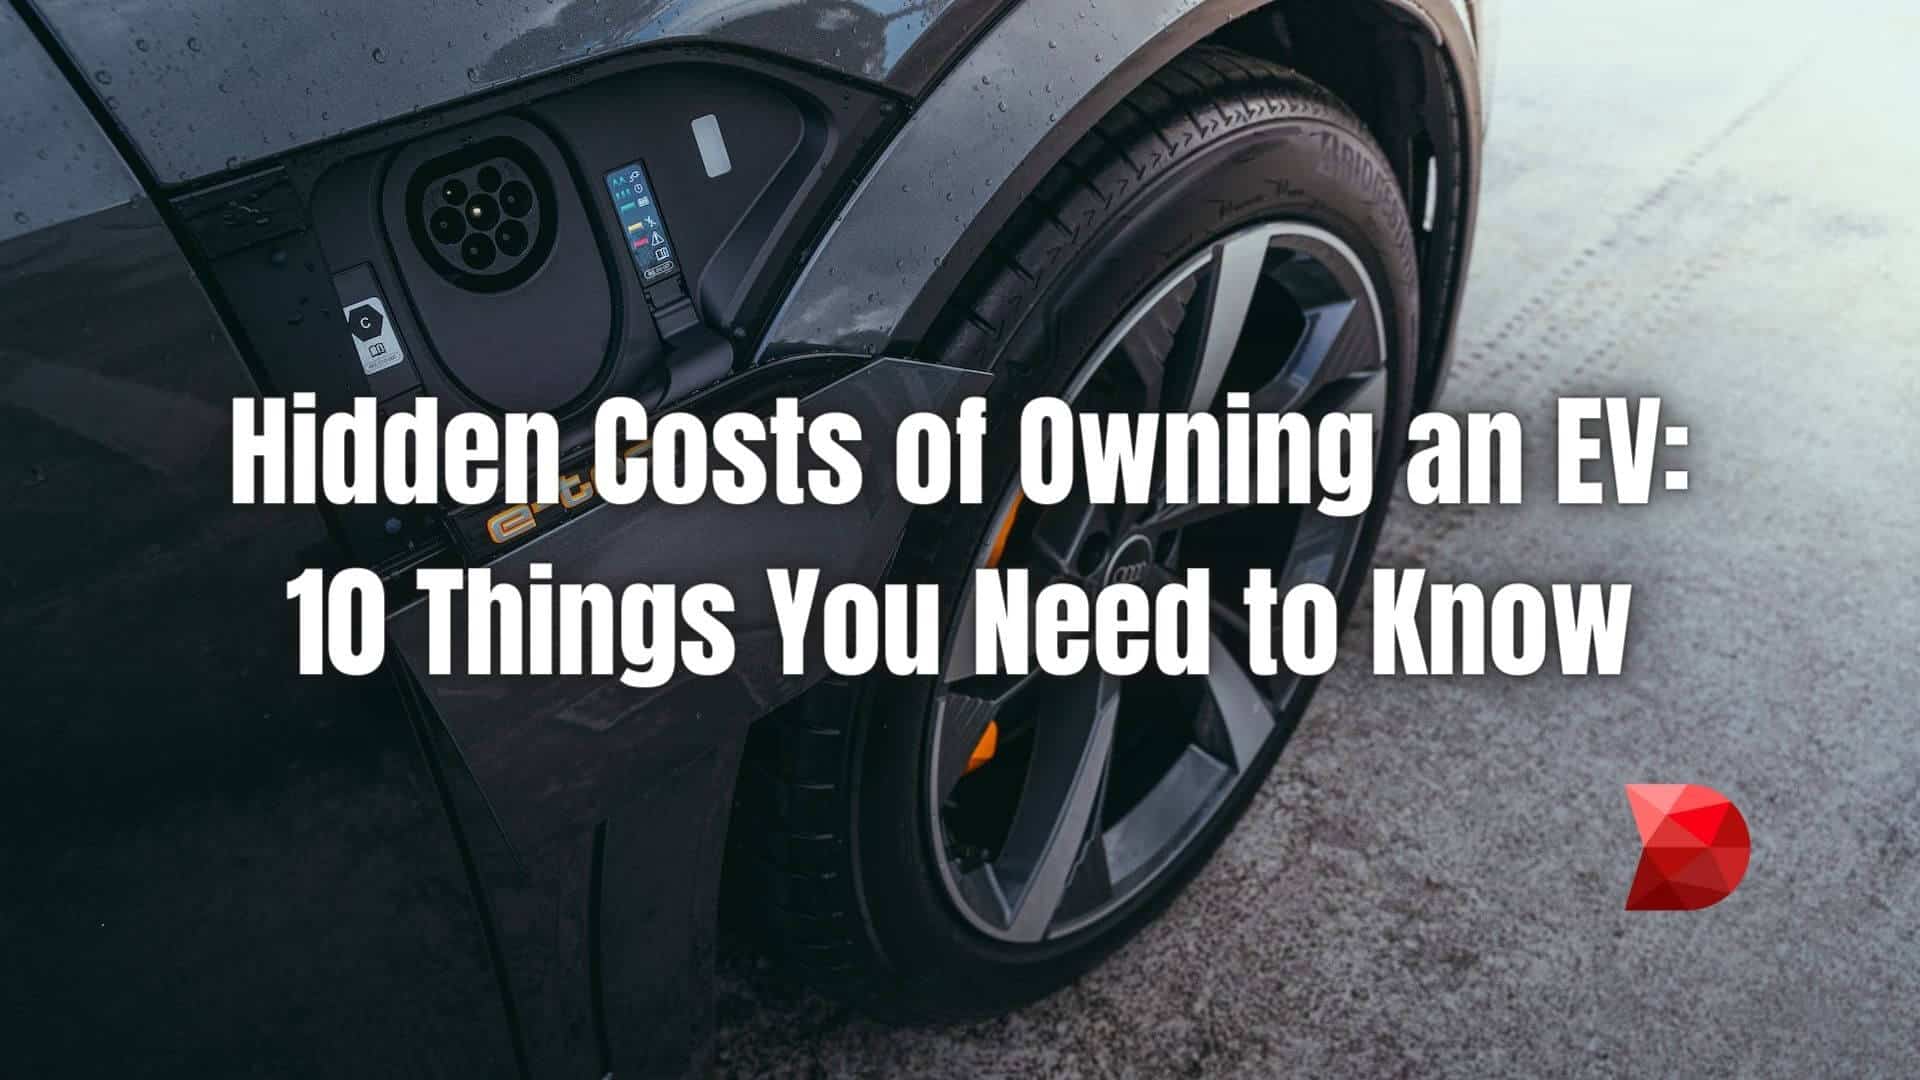 Unlock the hidden costs of owning an electric car. Click here to learn about the 10 essential expenses impacting your EV journey.